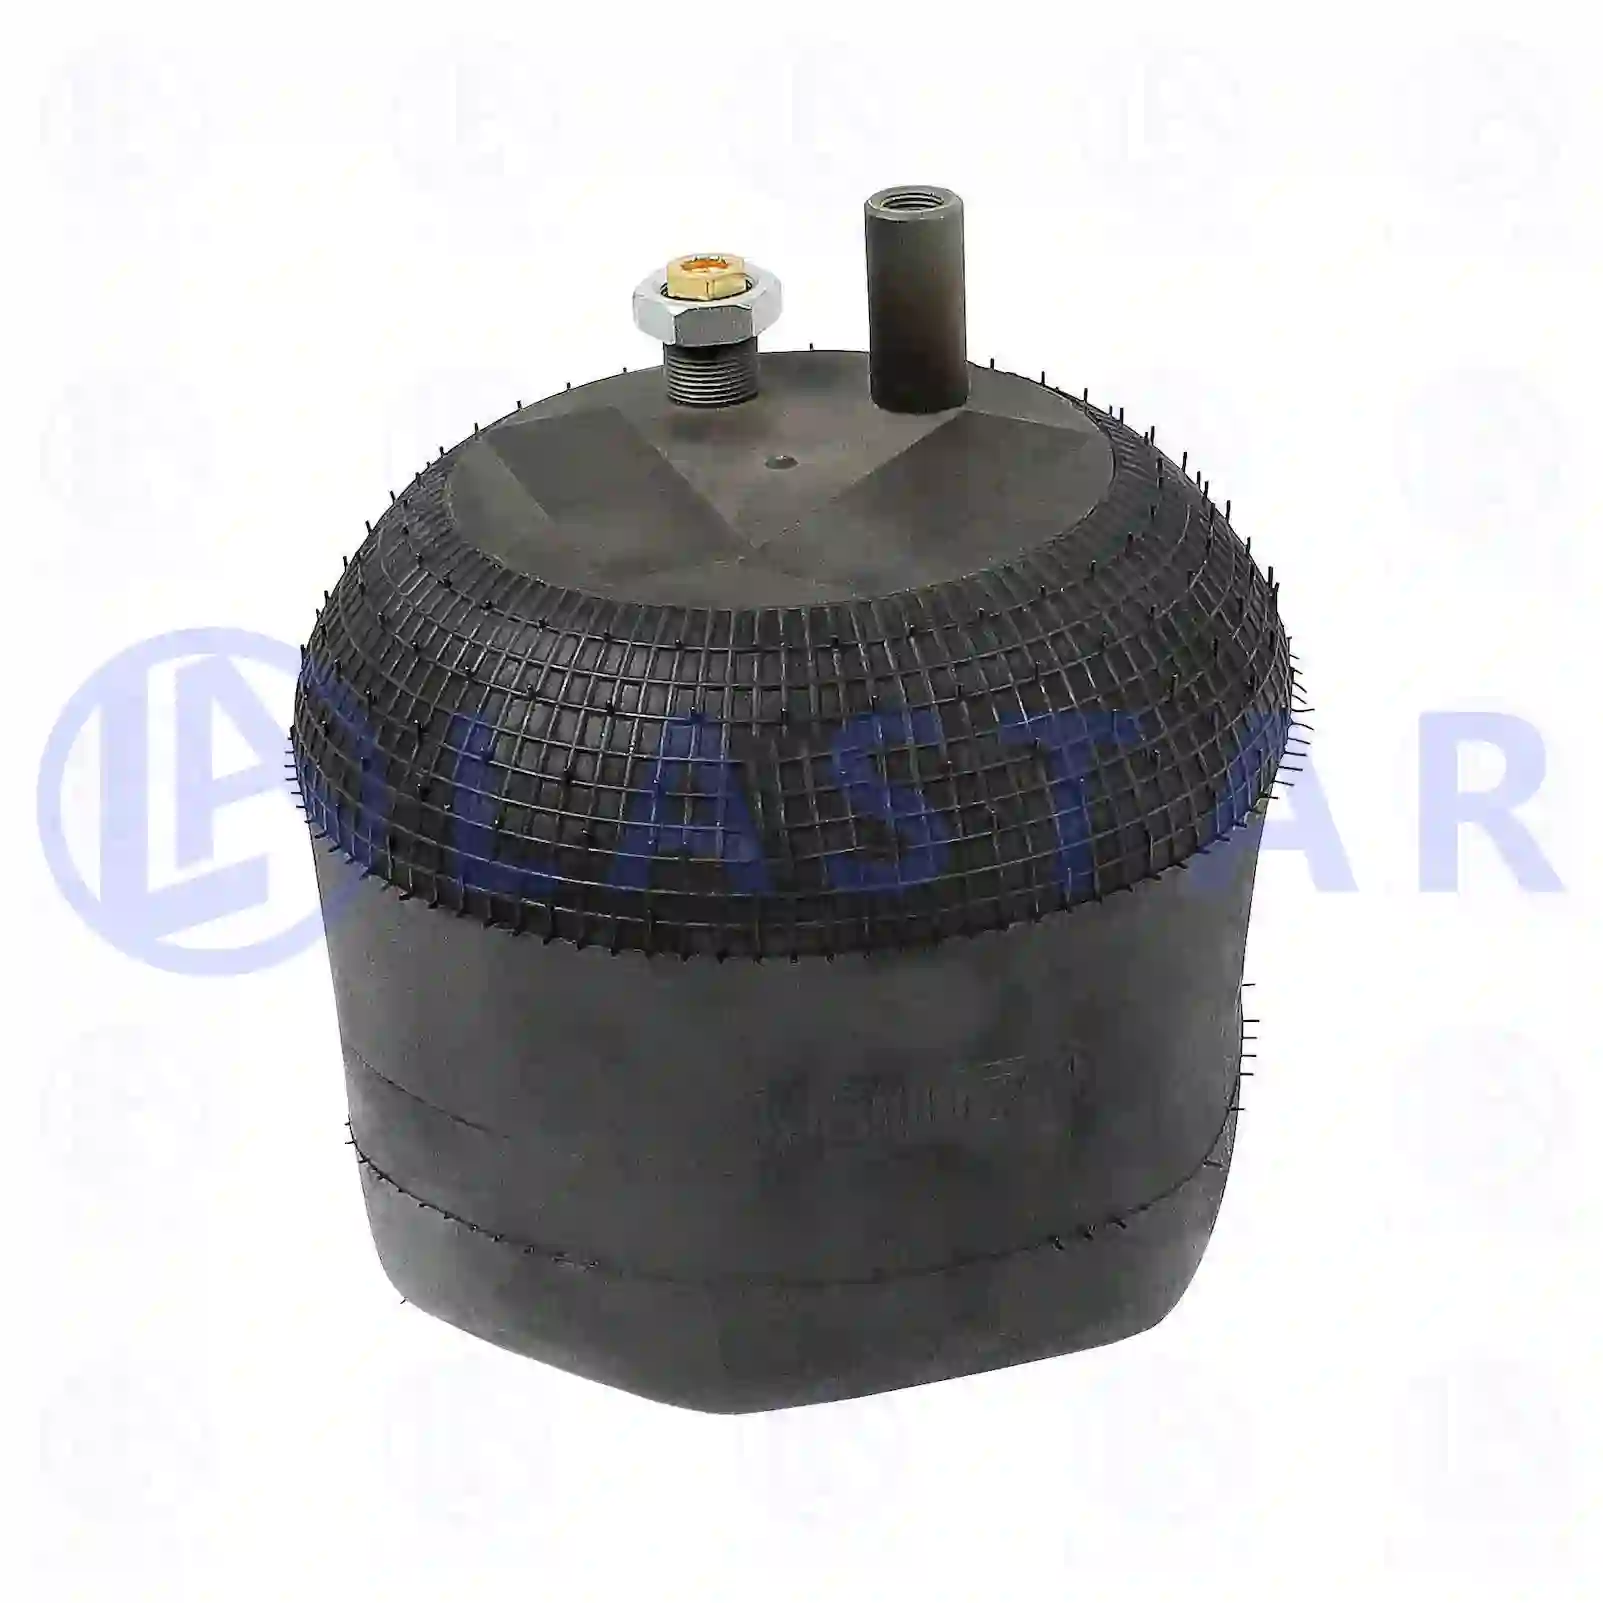 Air spring, without piston, 77728260, 9423280701 ||  77728260 Lastar Spare Part | Truck Spare Parts, Auotomotive Spare Parts Air spring, without piston, 77728260, 9423280701 ||  77728260 Lastar Spare Part | Truck Spare Parts, Auotomotive Spare Parts